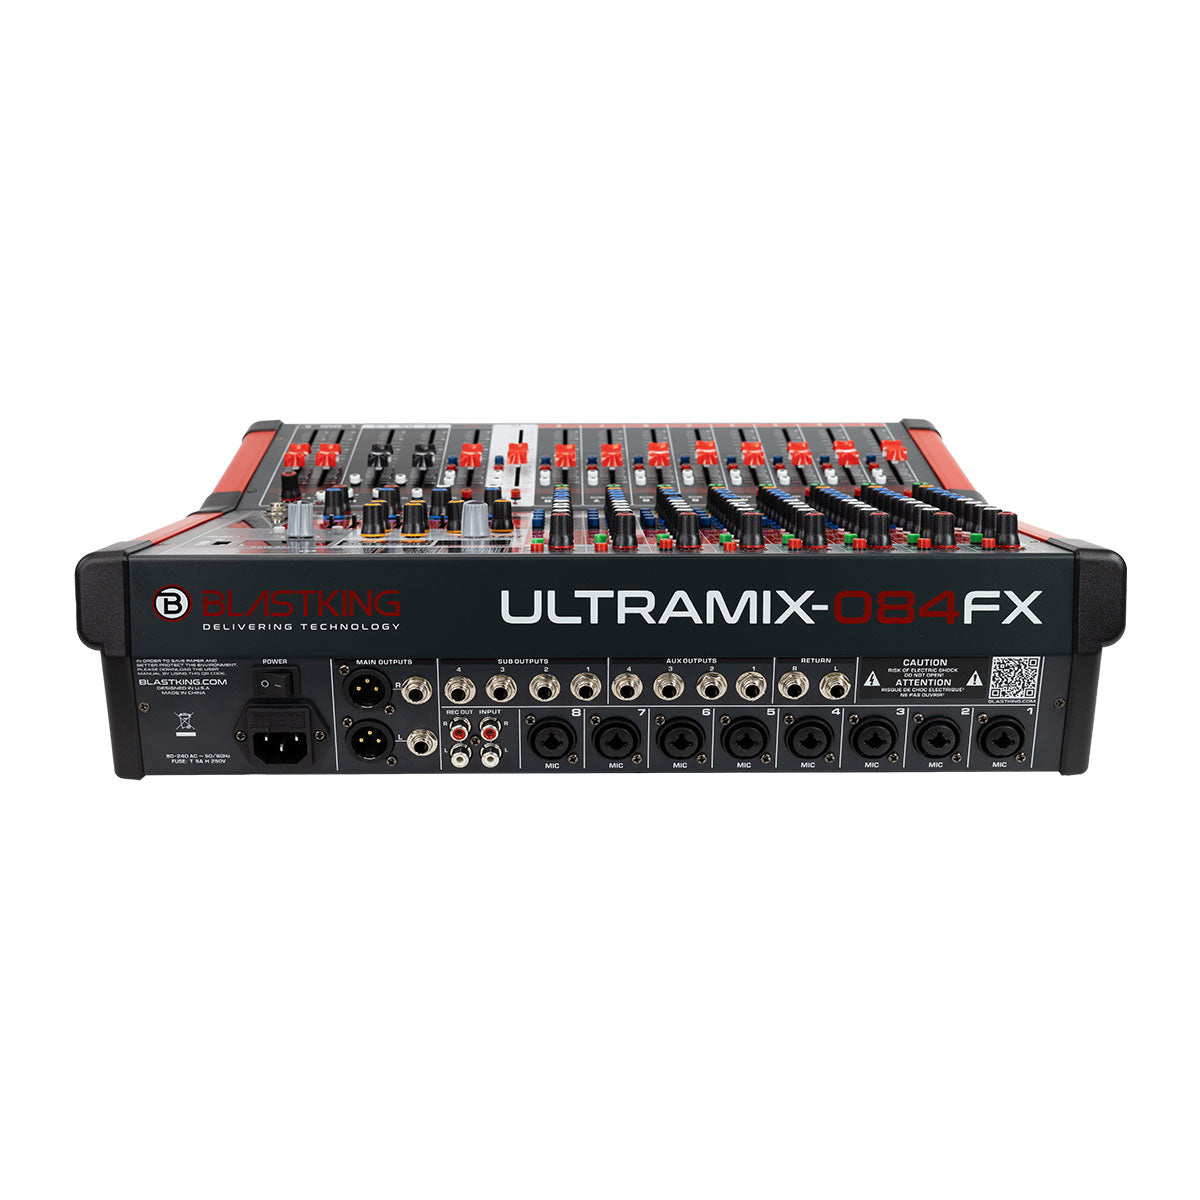 Blastking ULTRAMIX-084FX 8 Channel Professional Mixing Console with 4 Aux and DSP